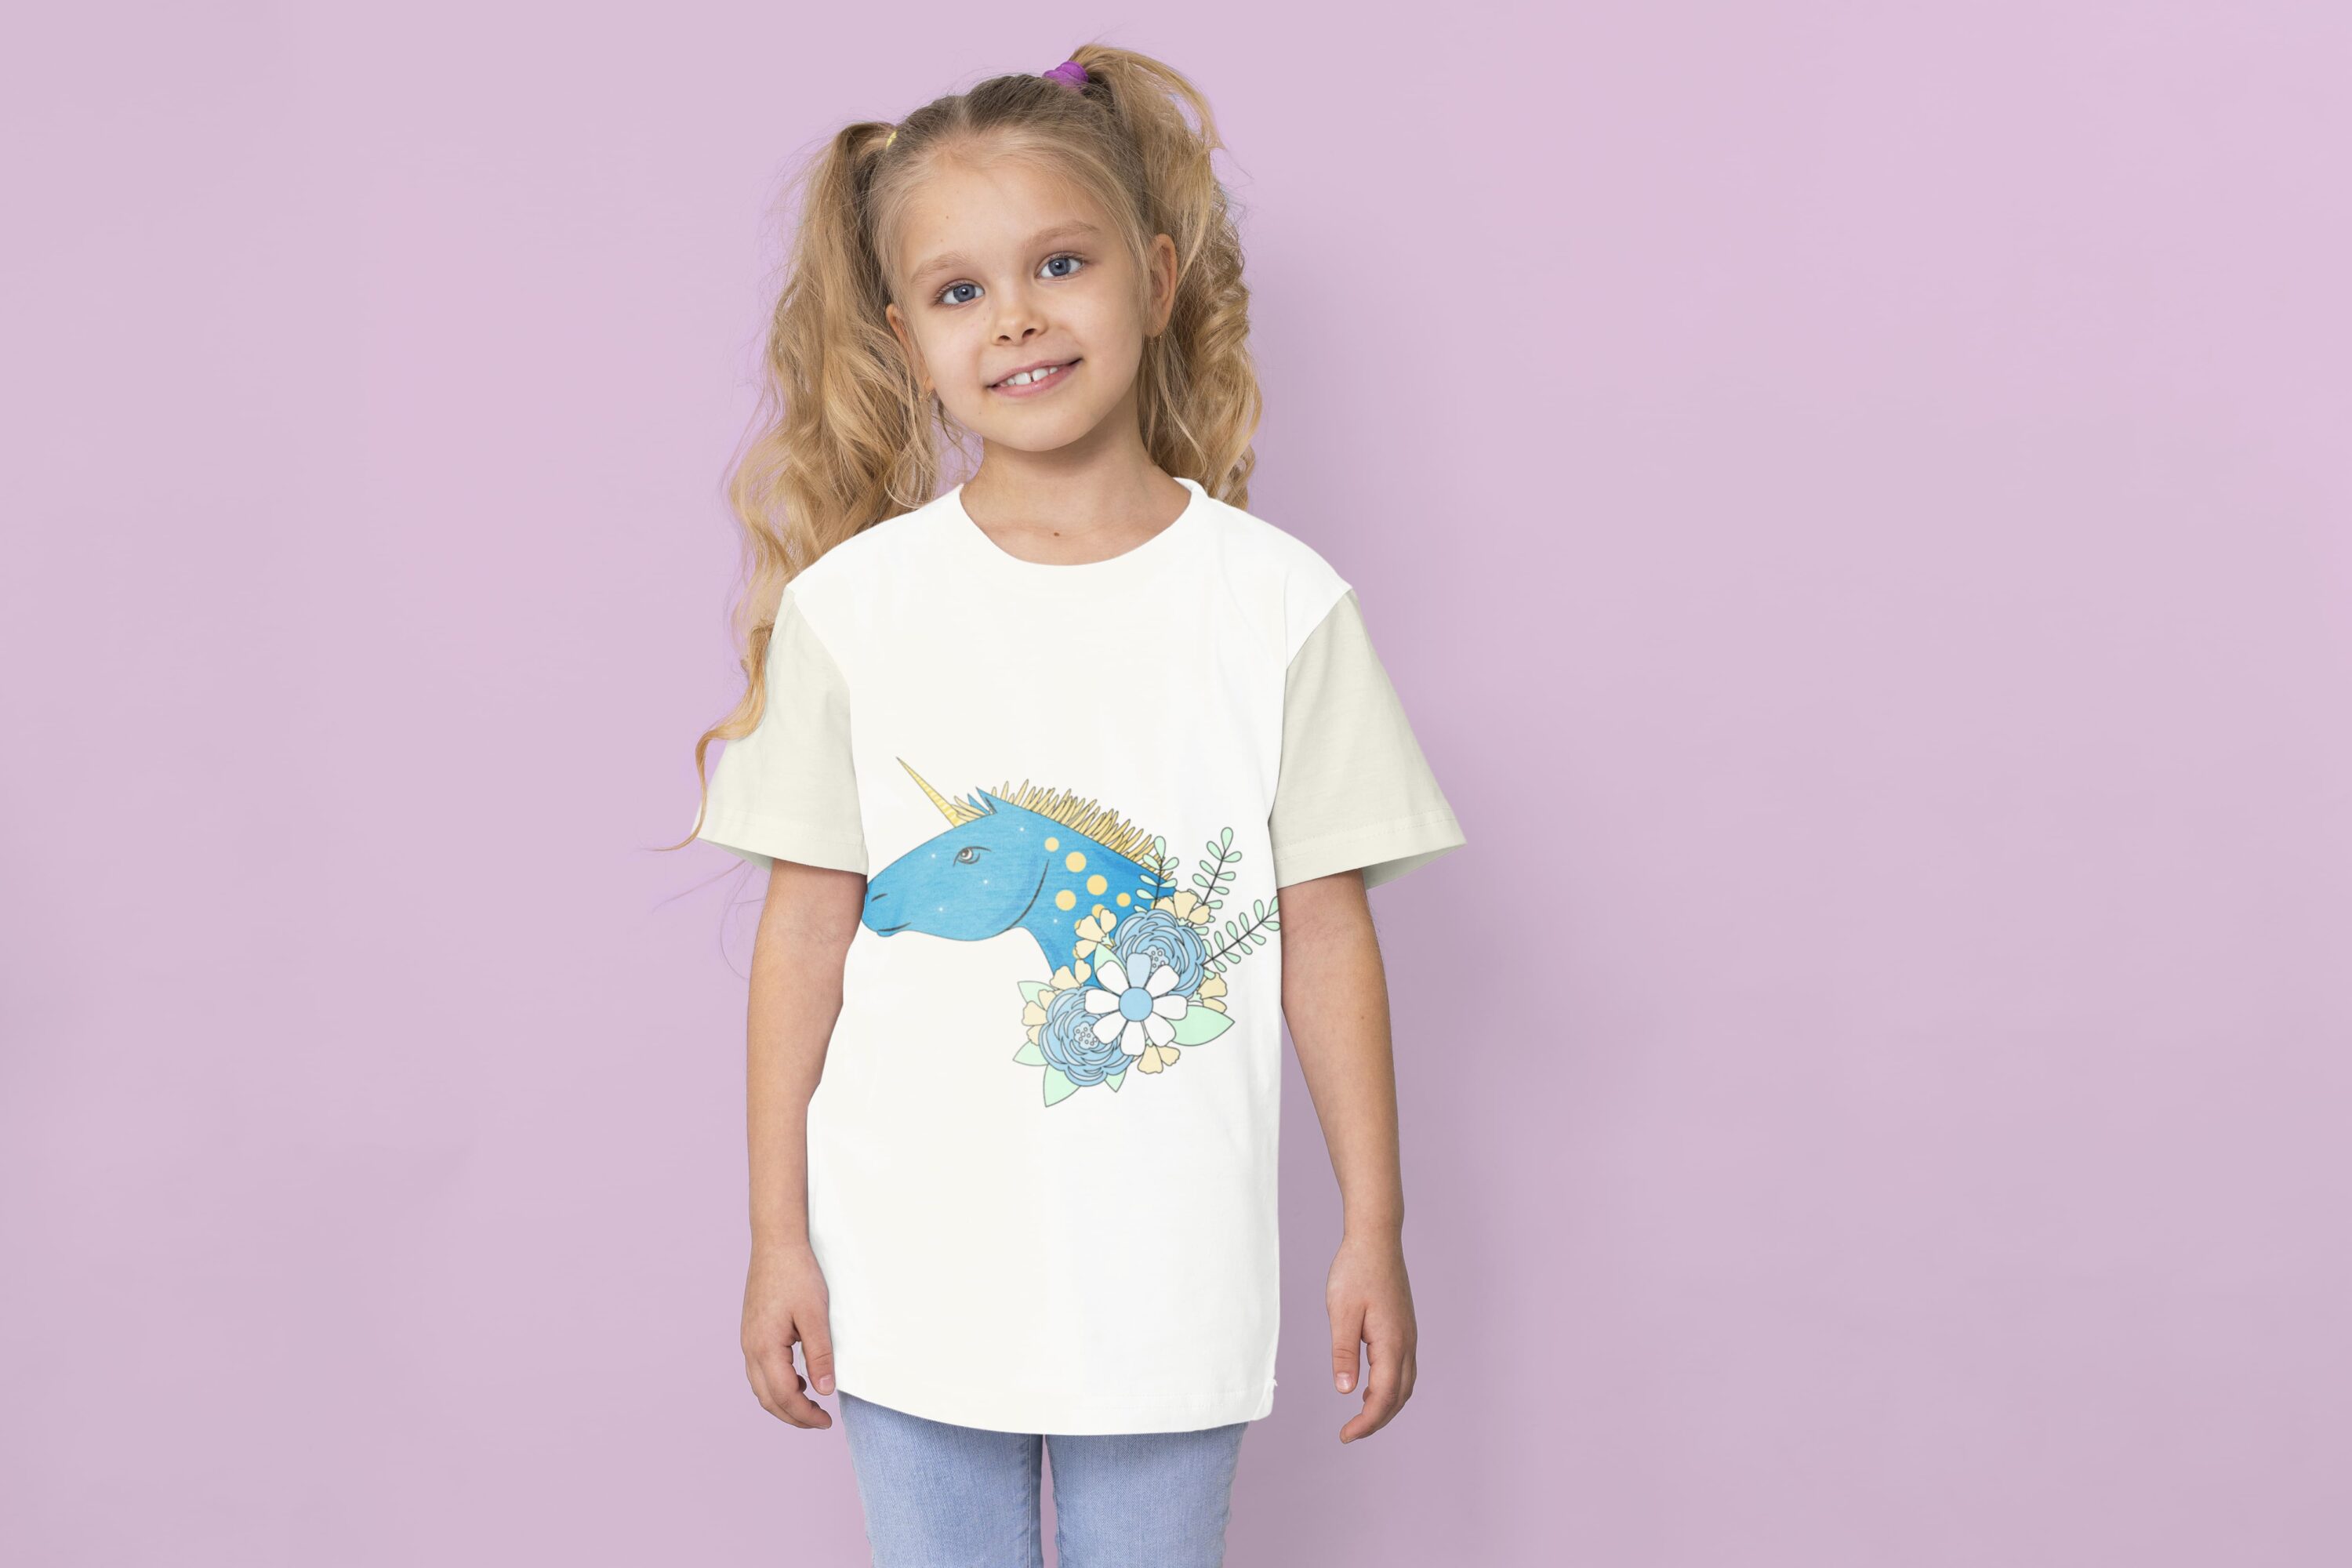 A white t-shirt with a blue unicorn face on a girl on a lavender background.